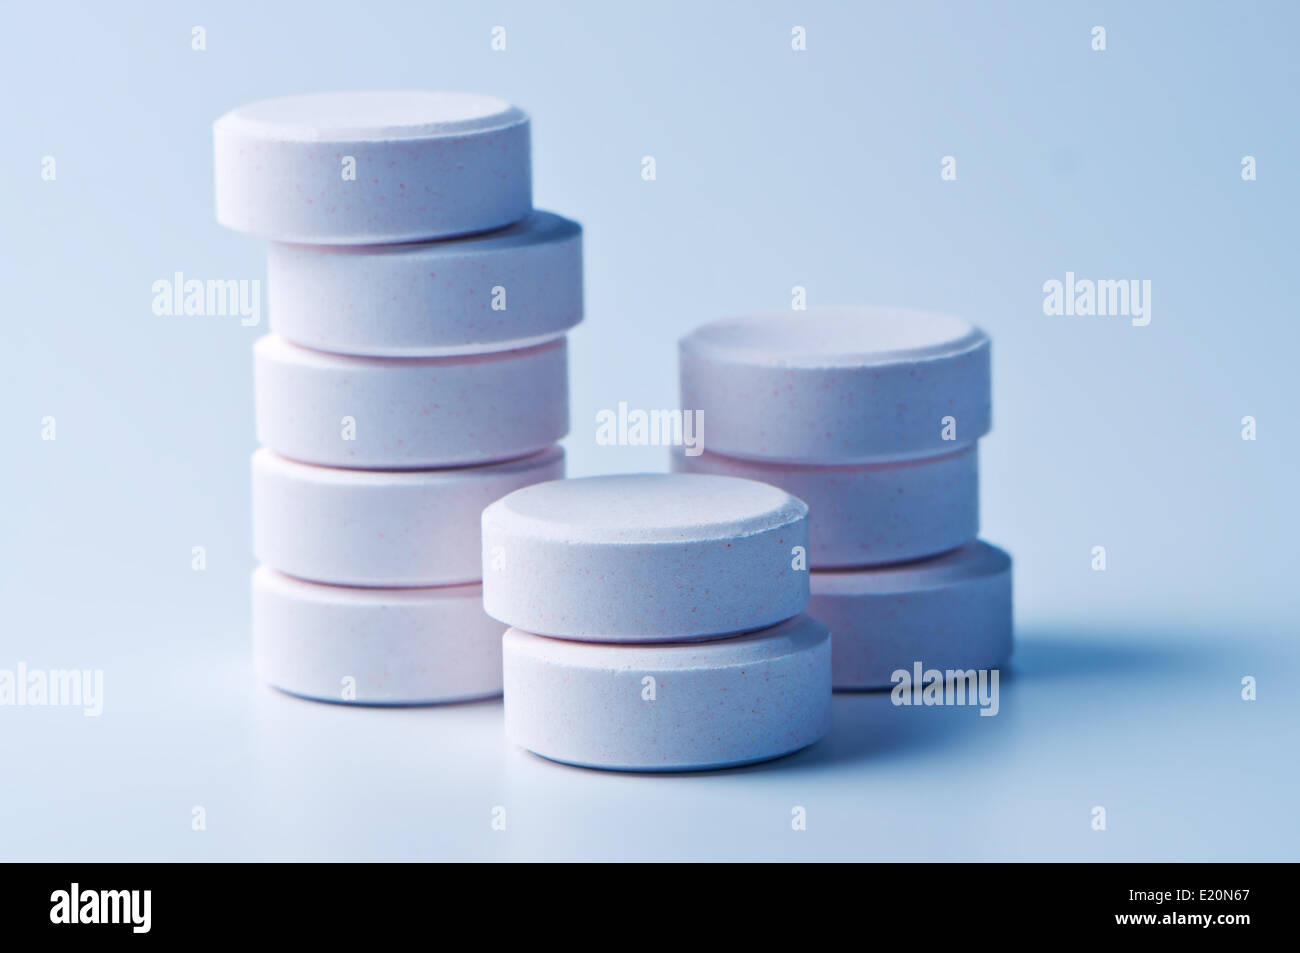 Stack of tablets close up. Stock Photo